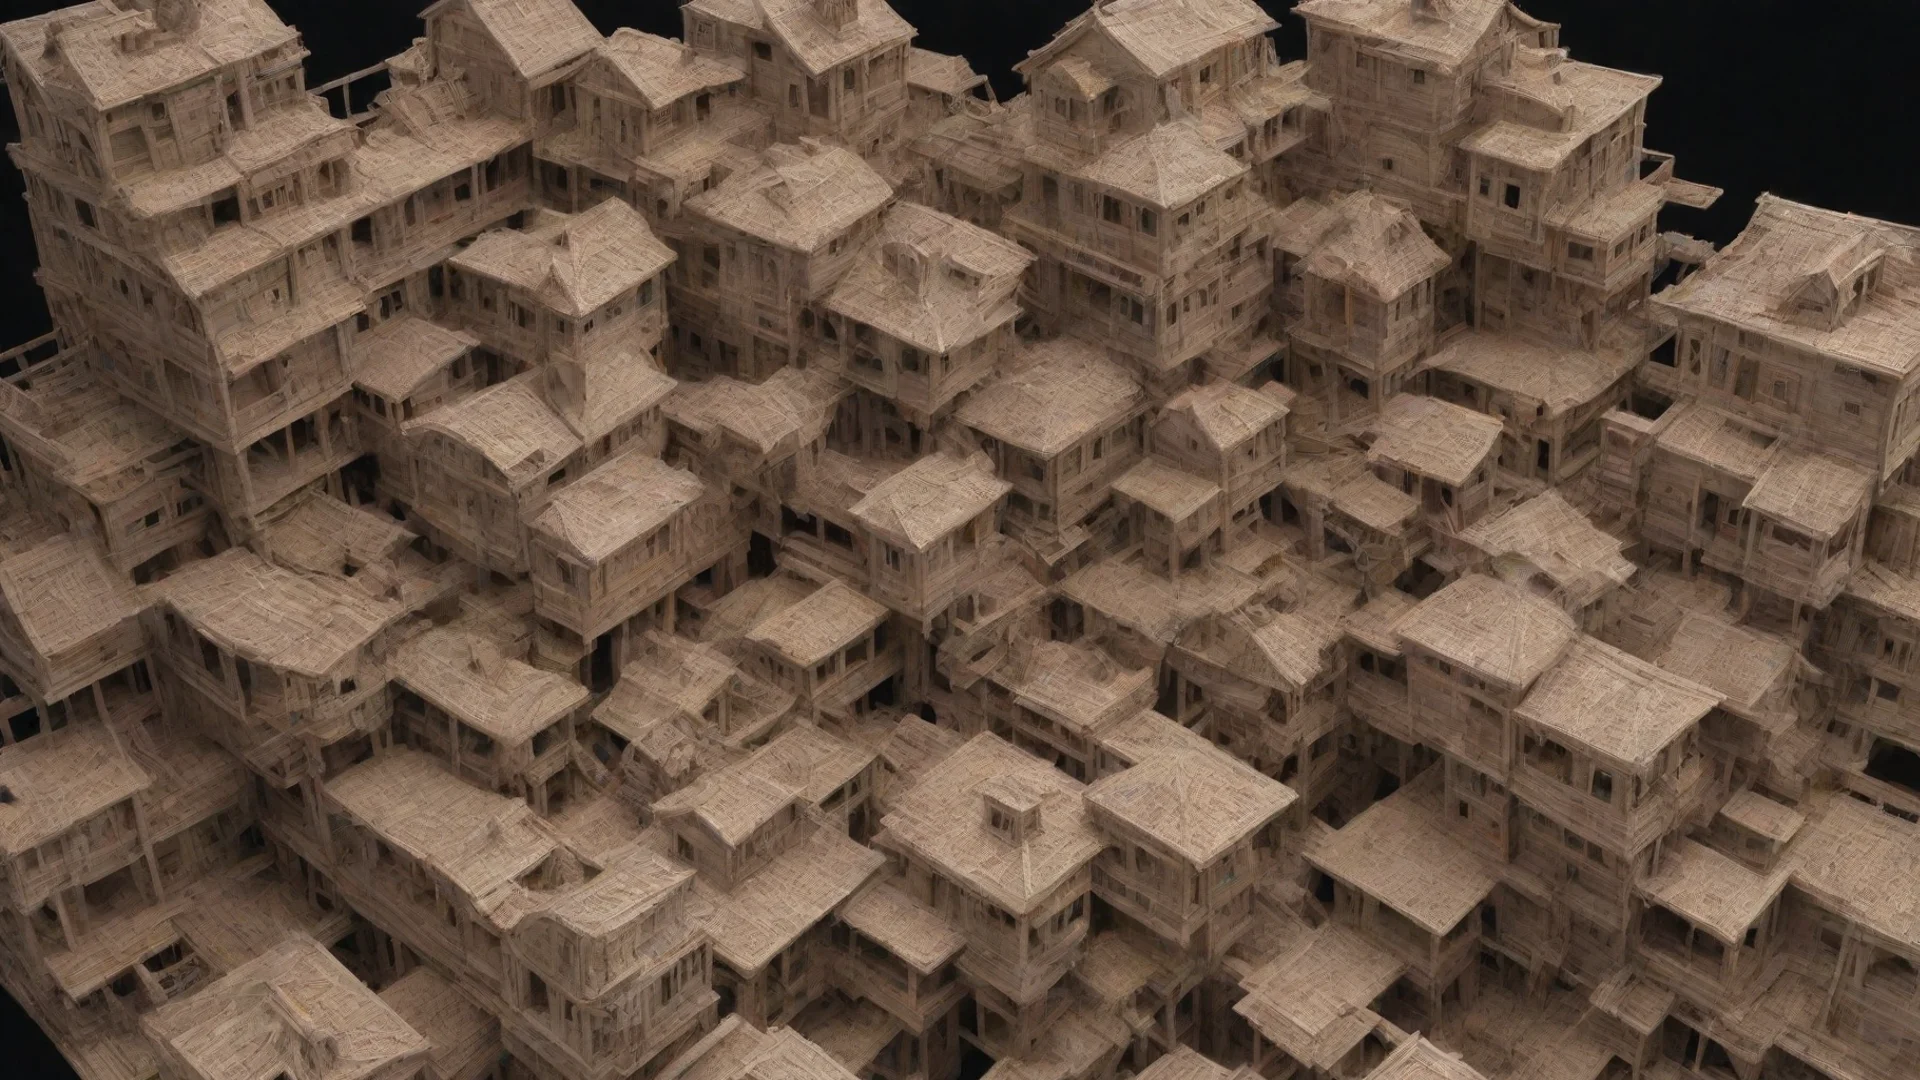 aitrending a swarm of parts intertwined upside down escher paradox kitbash greeble timber construction building in a building socia good looking fantastic 1 wide